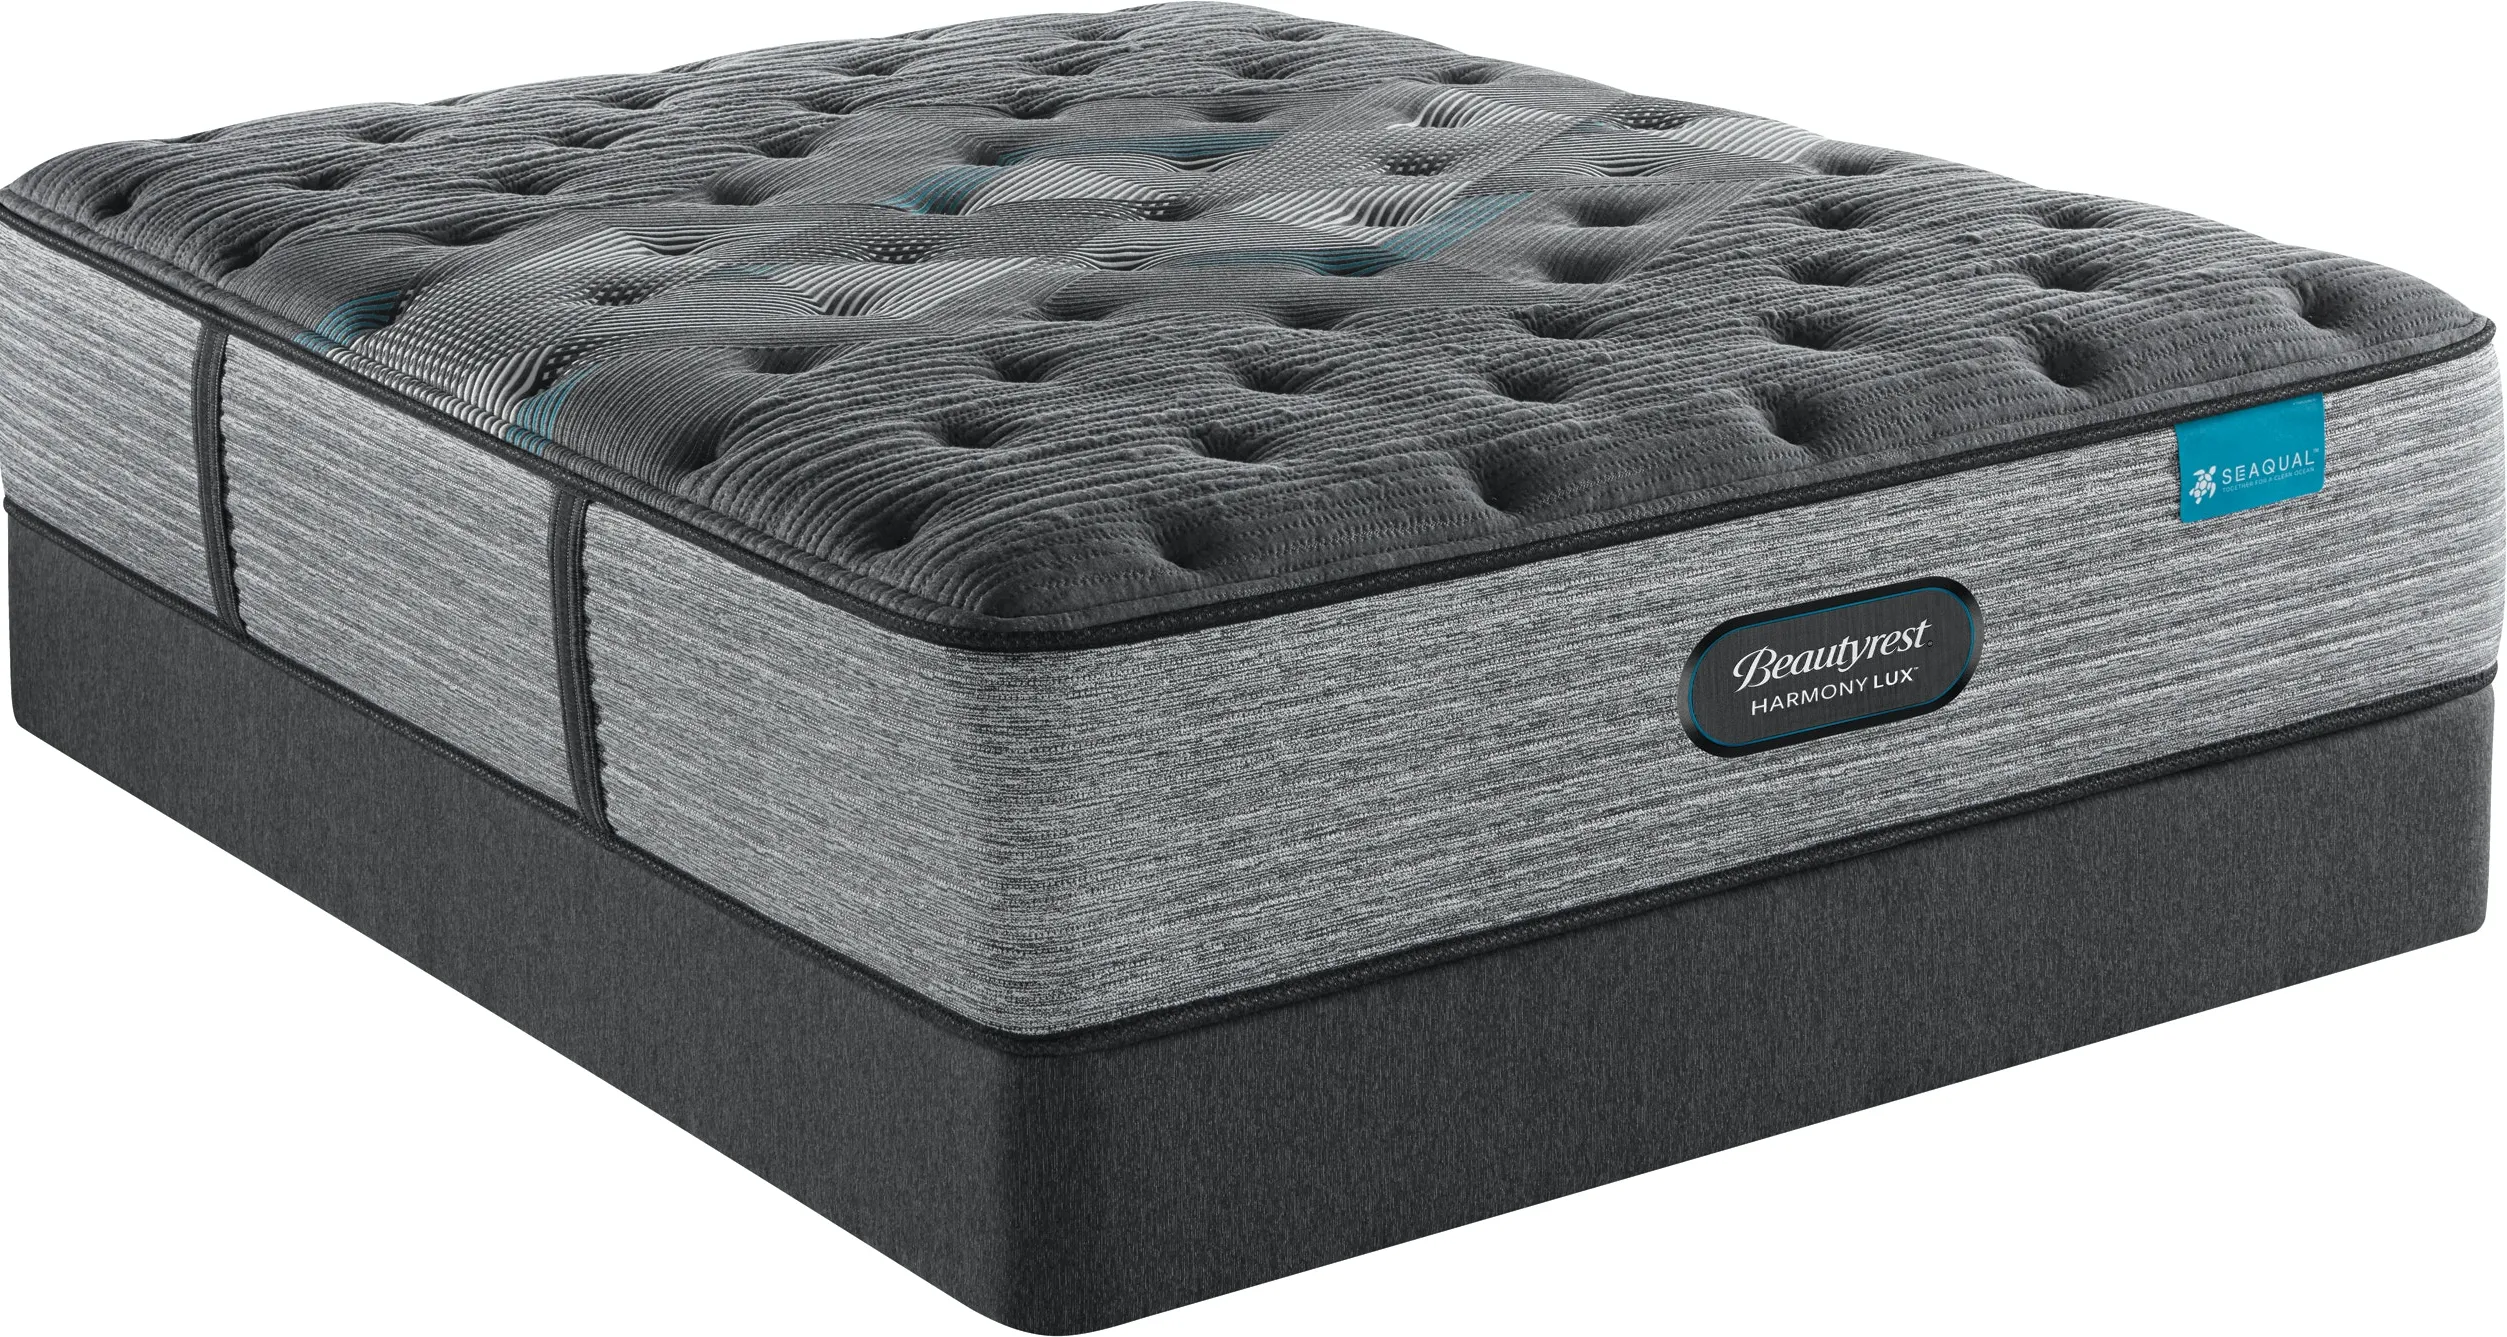 Simmons Beautyrest® Harmony Lux Twin Plush Mattress Only